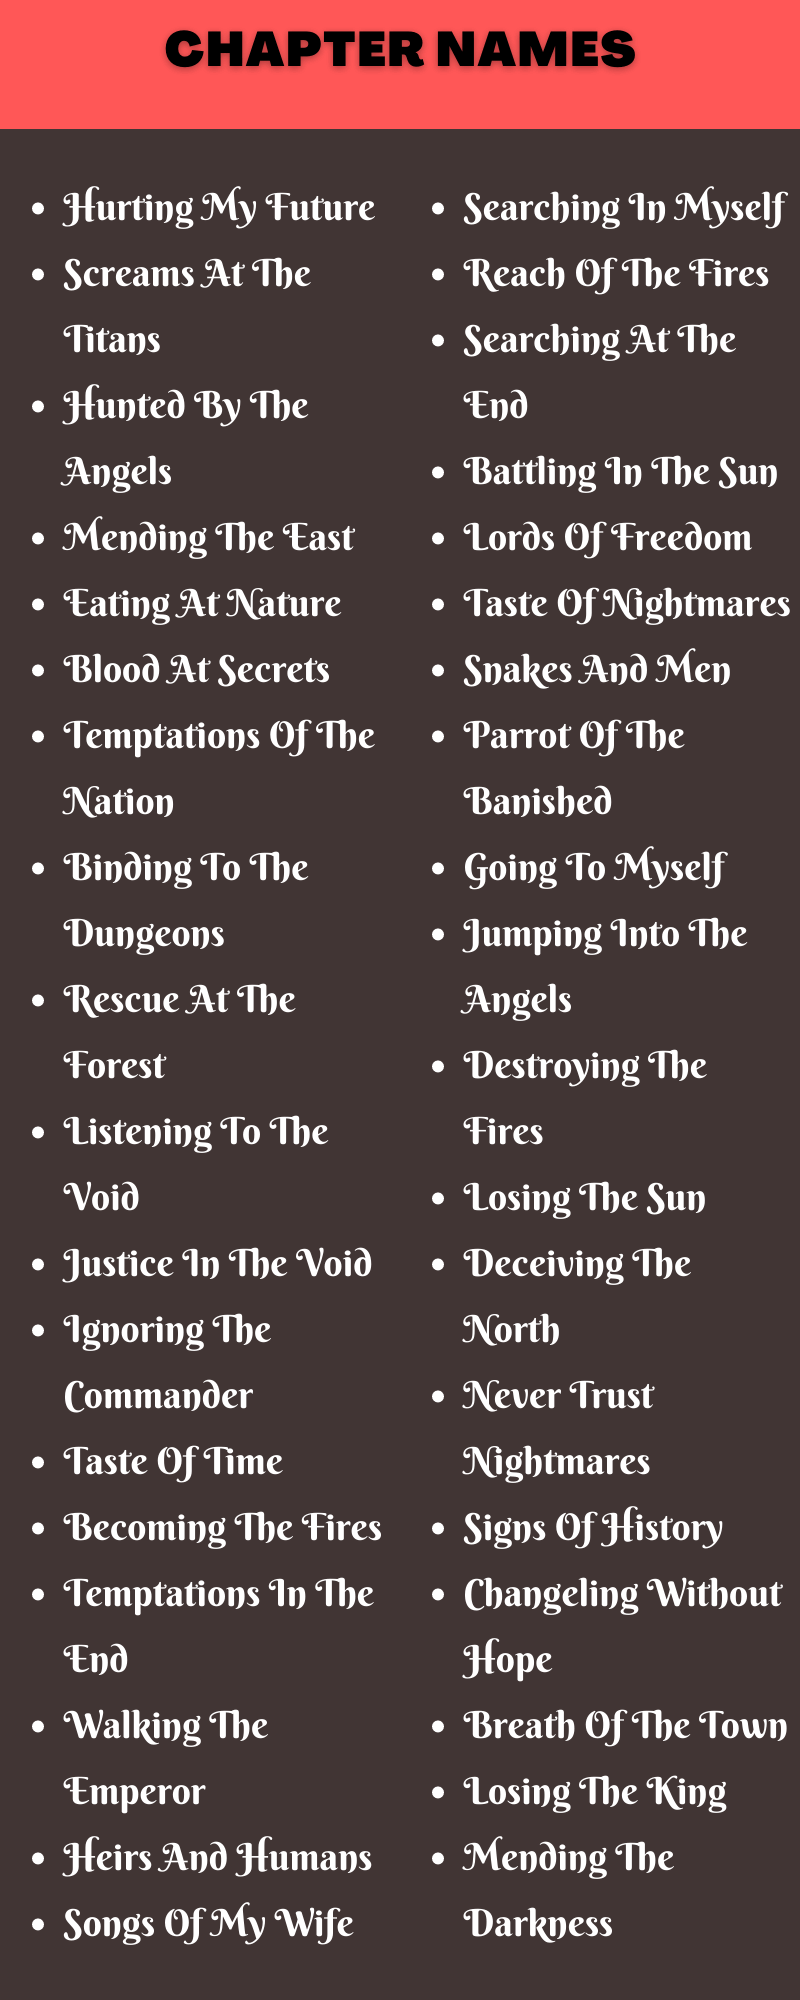 400 Good Chapter Names Ideas and Suggestions